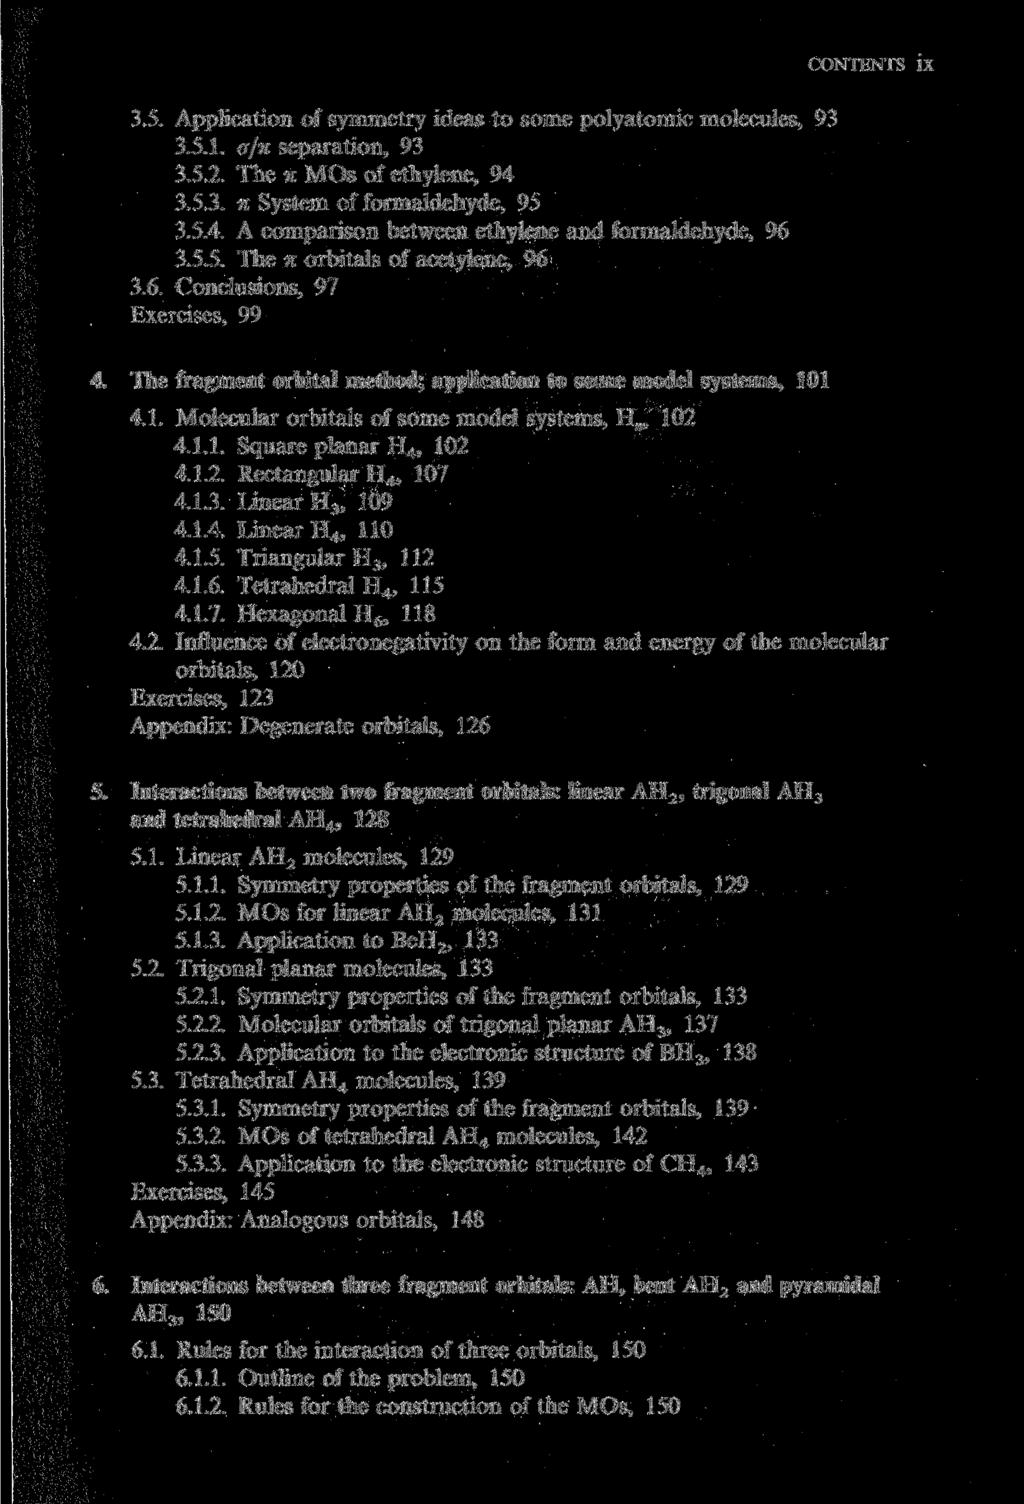 3.5. Application of symmetry ideas to some polyatomic molecules, 93 3.5.1. a/n Separation, 93 3.5.2. The n MOs of ethylene, 94 3.5.3. n System of formaldehyde, 95 3.5.4. A comparison between ethylene and formaldehyde, 96 3.